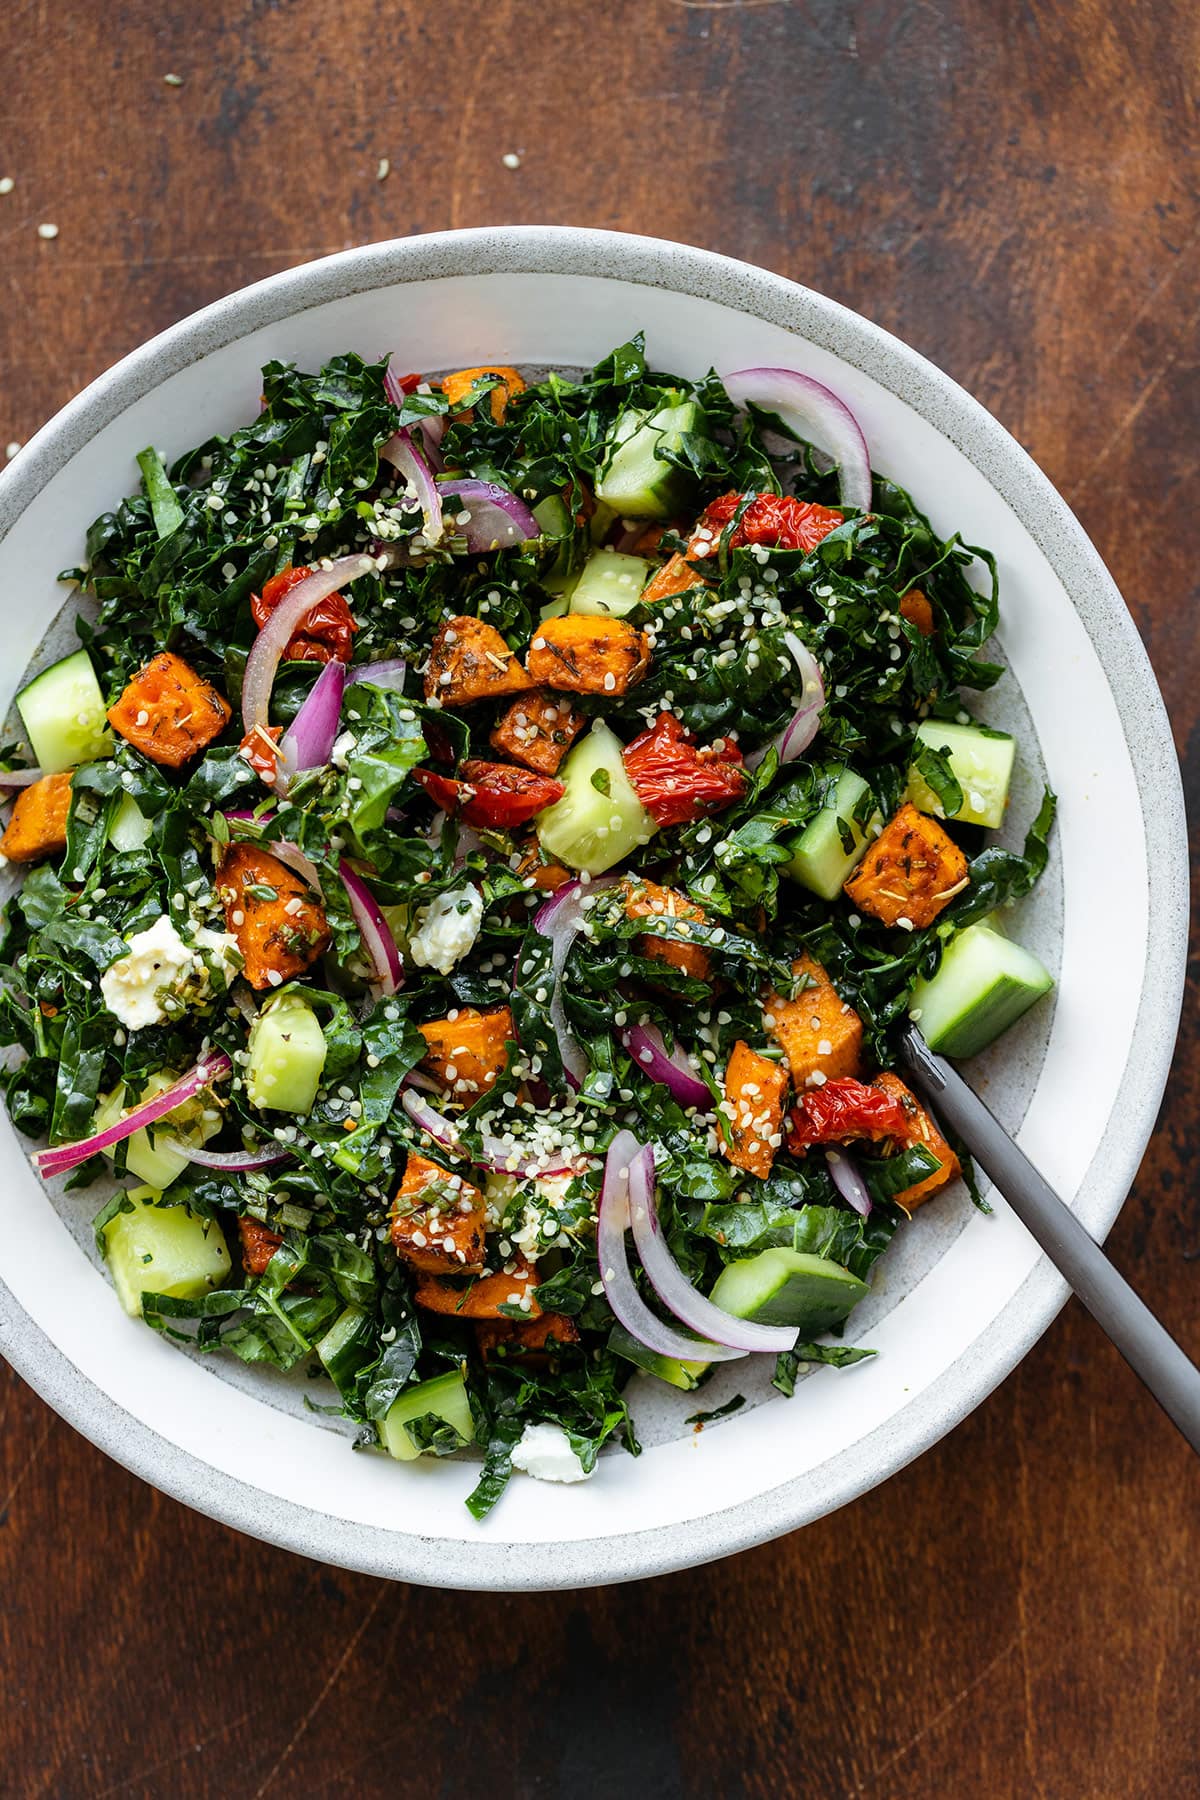 Kale salad in a shallow grey bowl with a black fork on a dark wooden background.